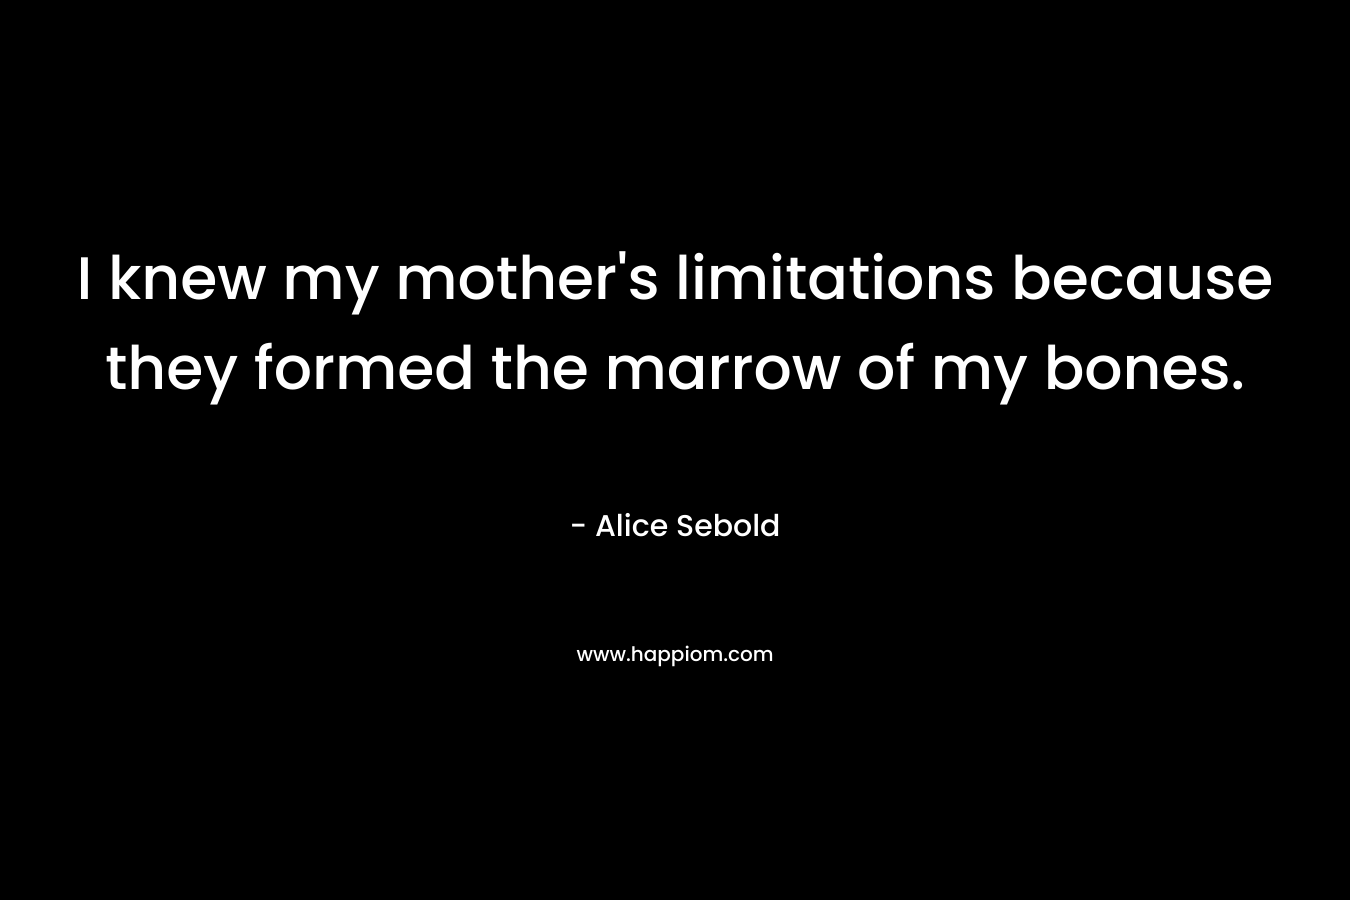 I knew my mother's limitations because they formed the marrow of my bones.